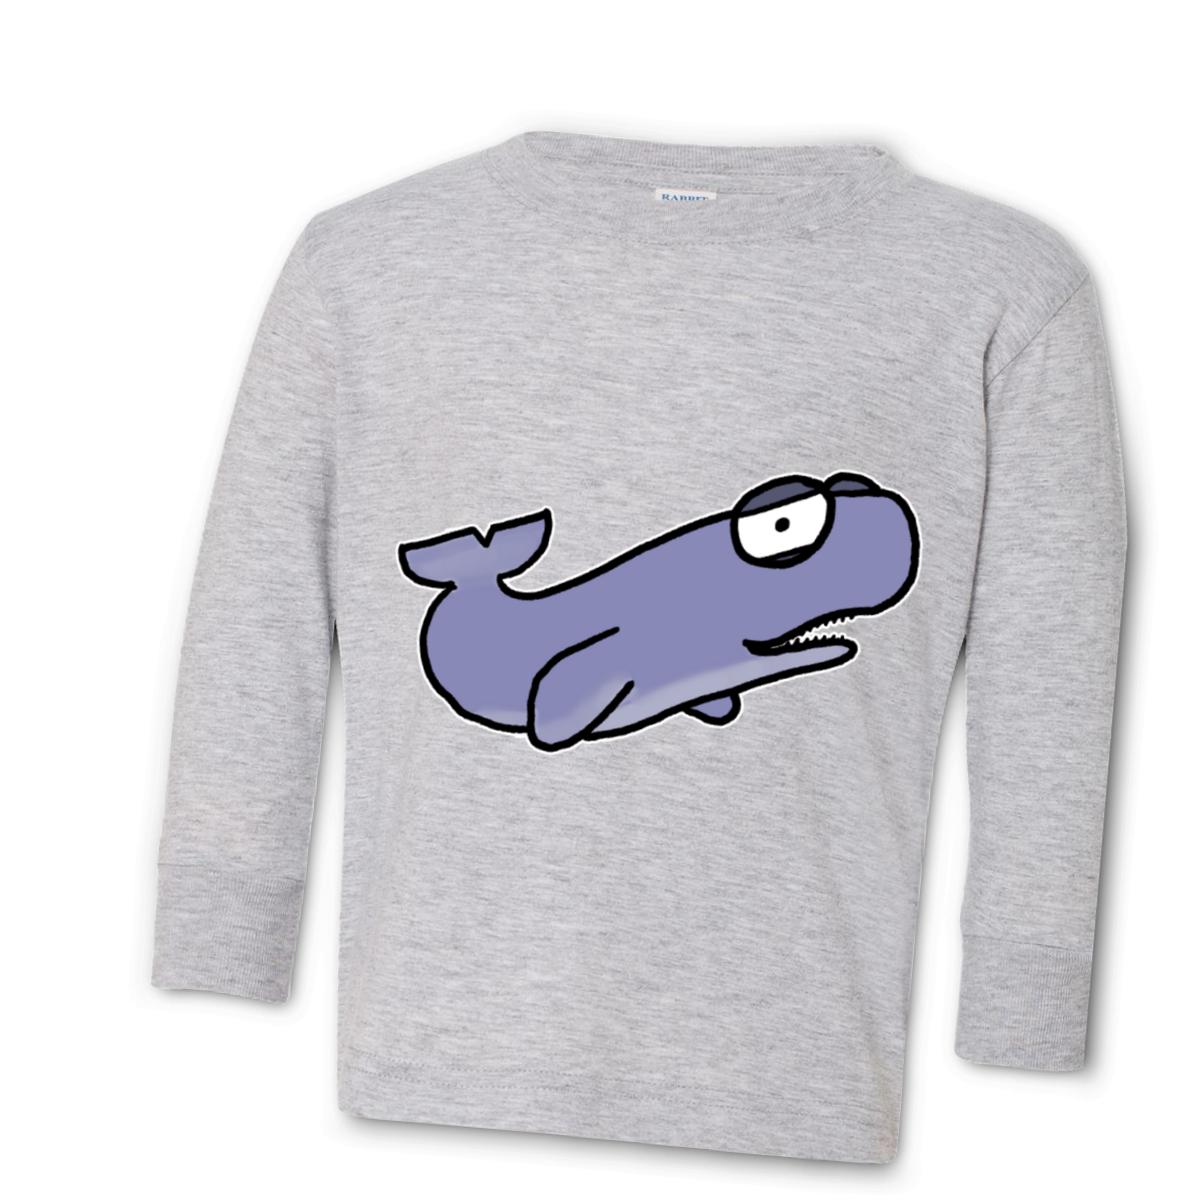 Sperm Whale Toddler Long Sleeve Tee 56T heather